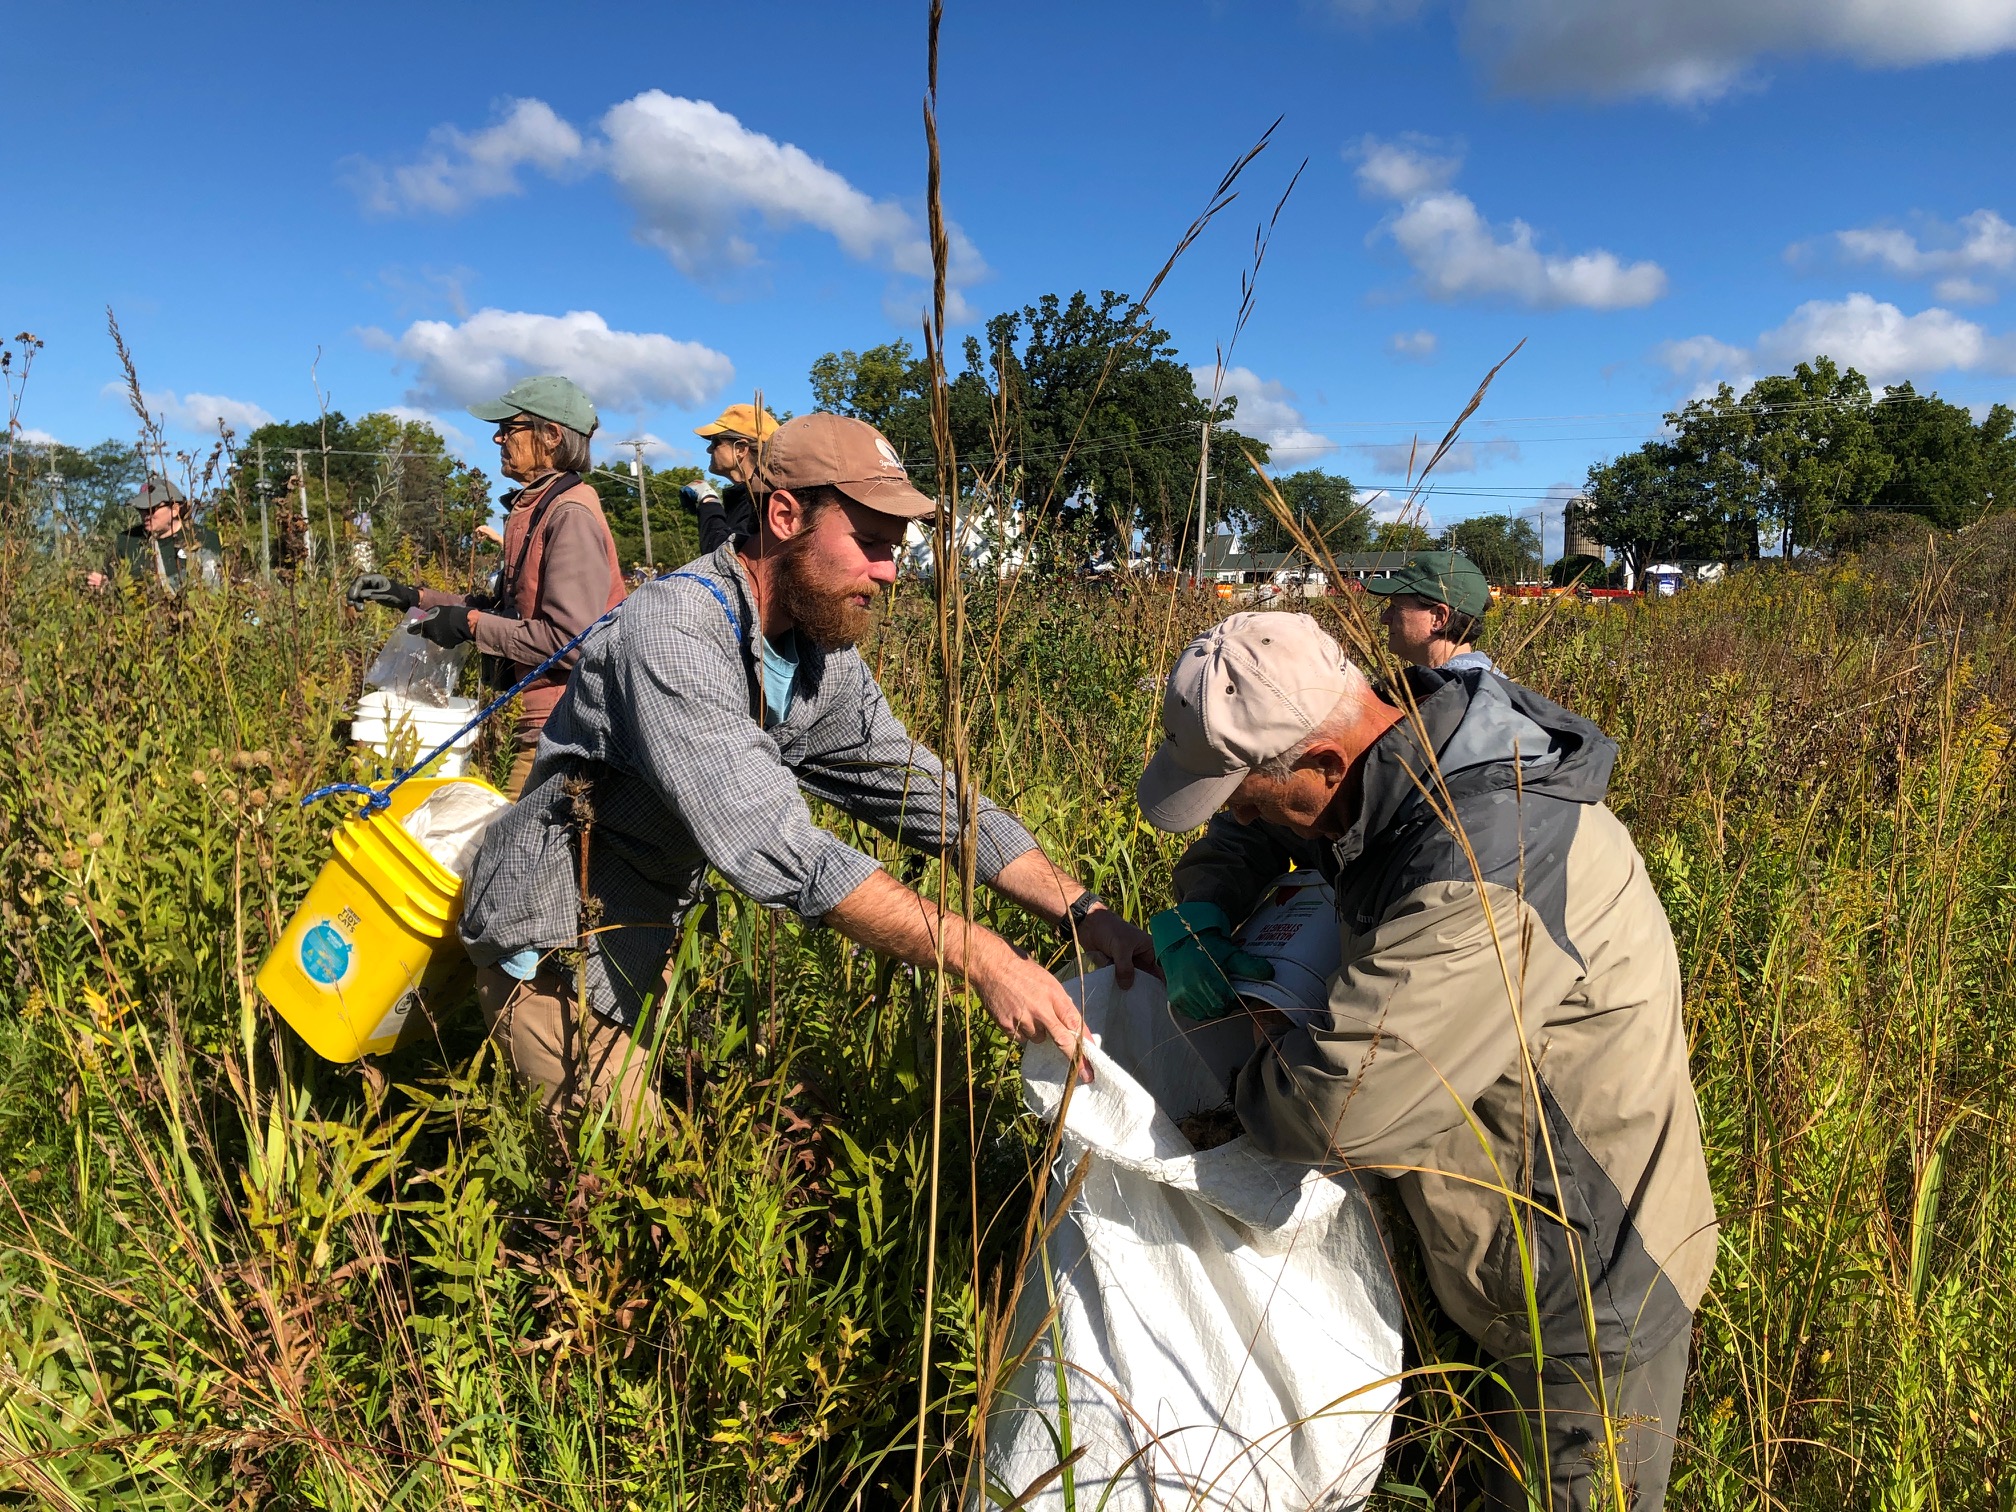 Volunteers assist with seed harvesting in a preserve.